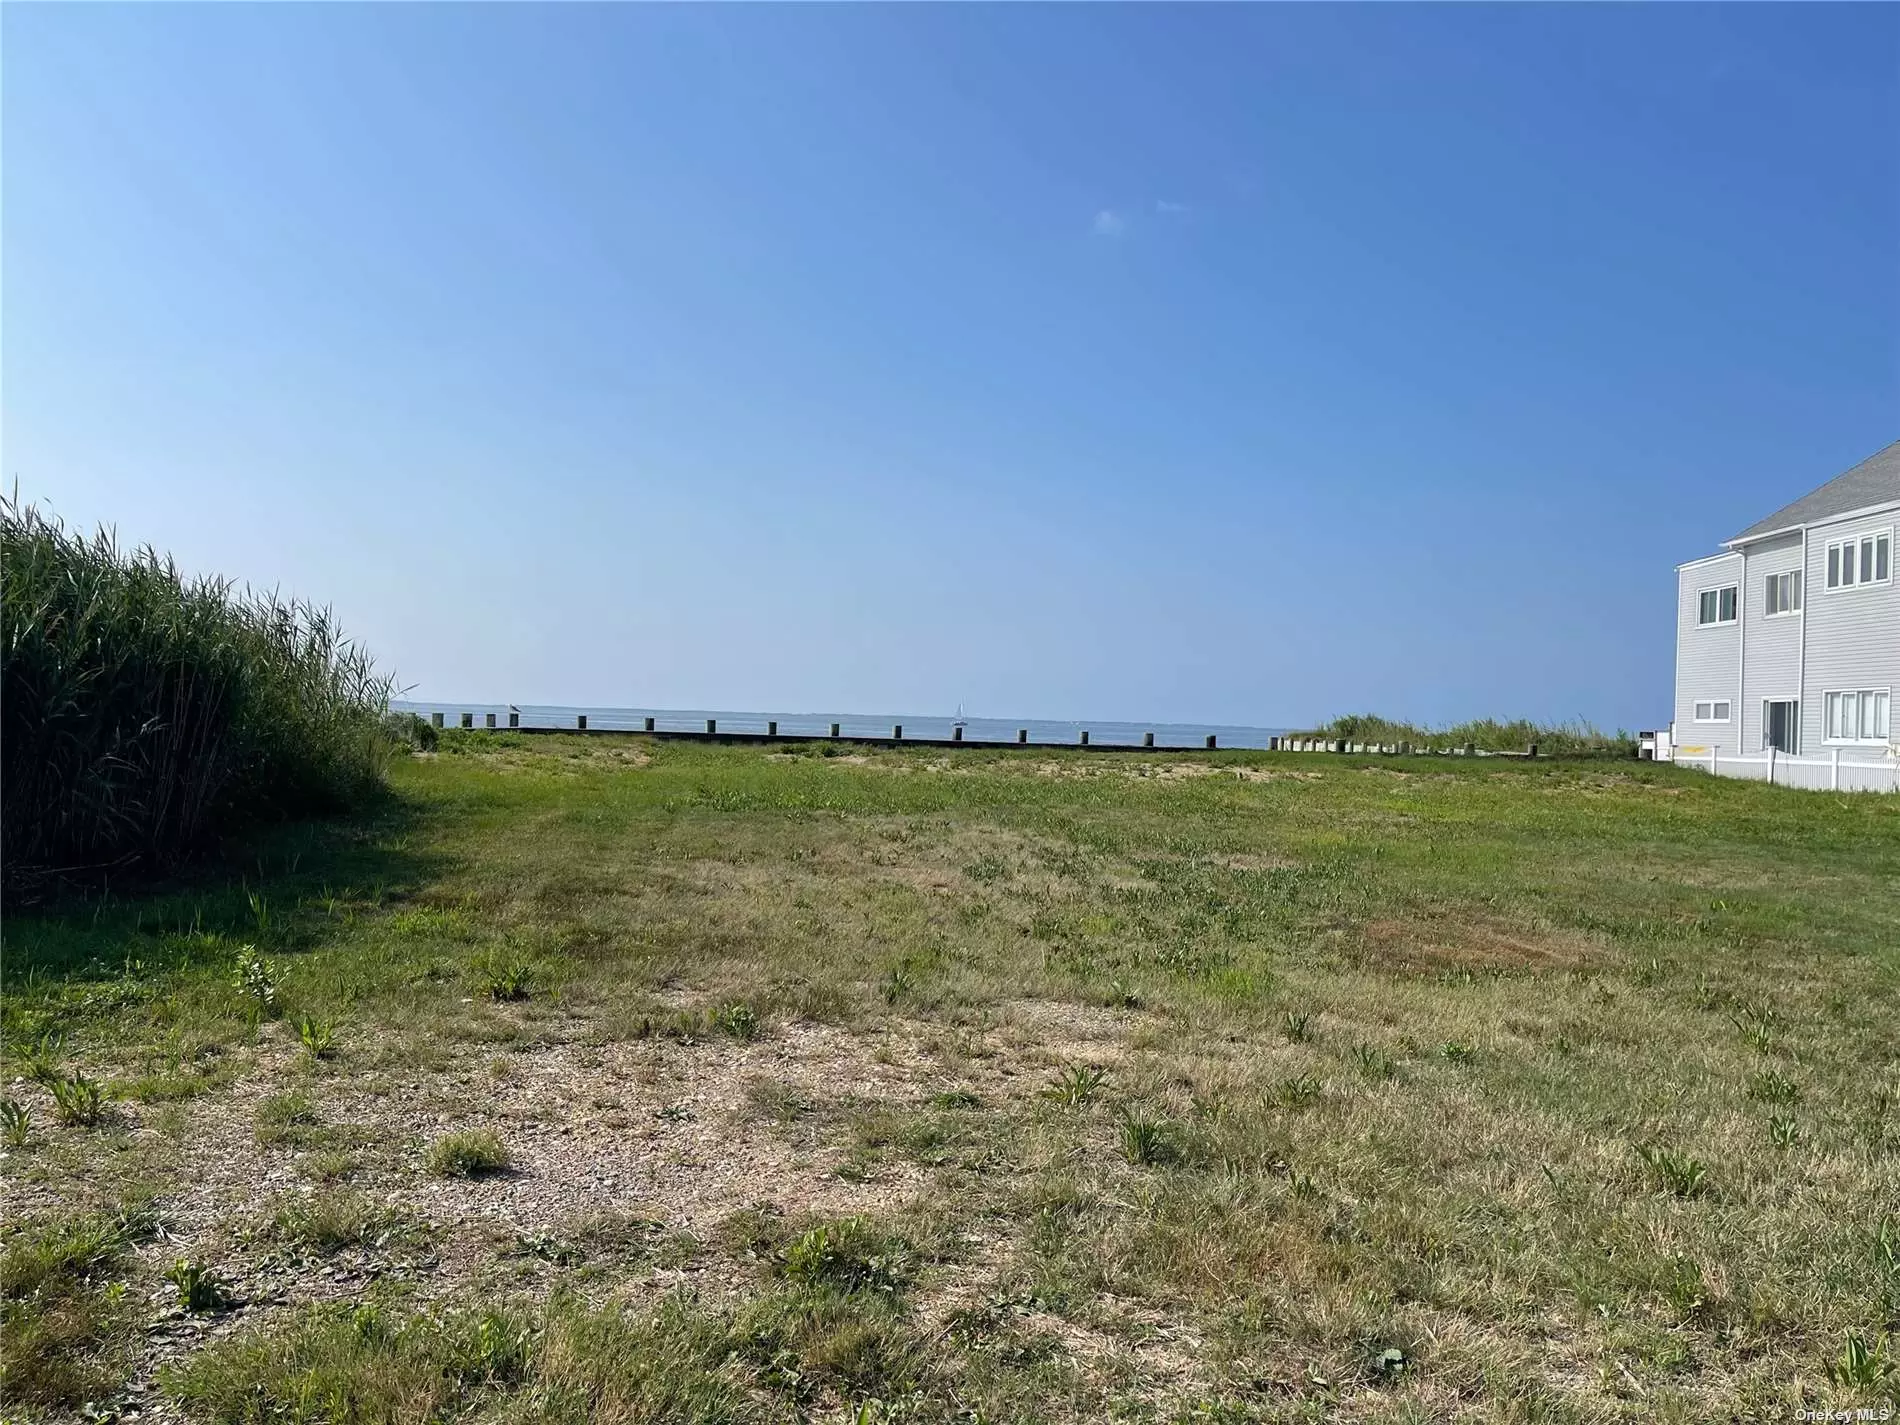 Buildable .38 acre of cleared waterfront property with 63.71 new bulkhead in 2018. Tax classification 282: Two (2) year round dwelling units on one parcel. Also zoned for mixed use. Cesspools, water, electric and gas lines in place (2). Next door to Sayville beach. Down the road from the Fire Island Ferry dock and Lands End Restaurant. Don&rsquo;t miss the chance to secure this premier waterfront lot on the Great South Bay.